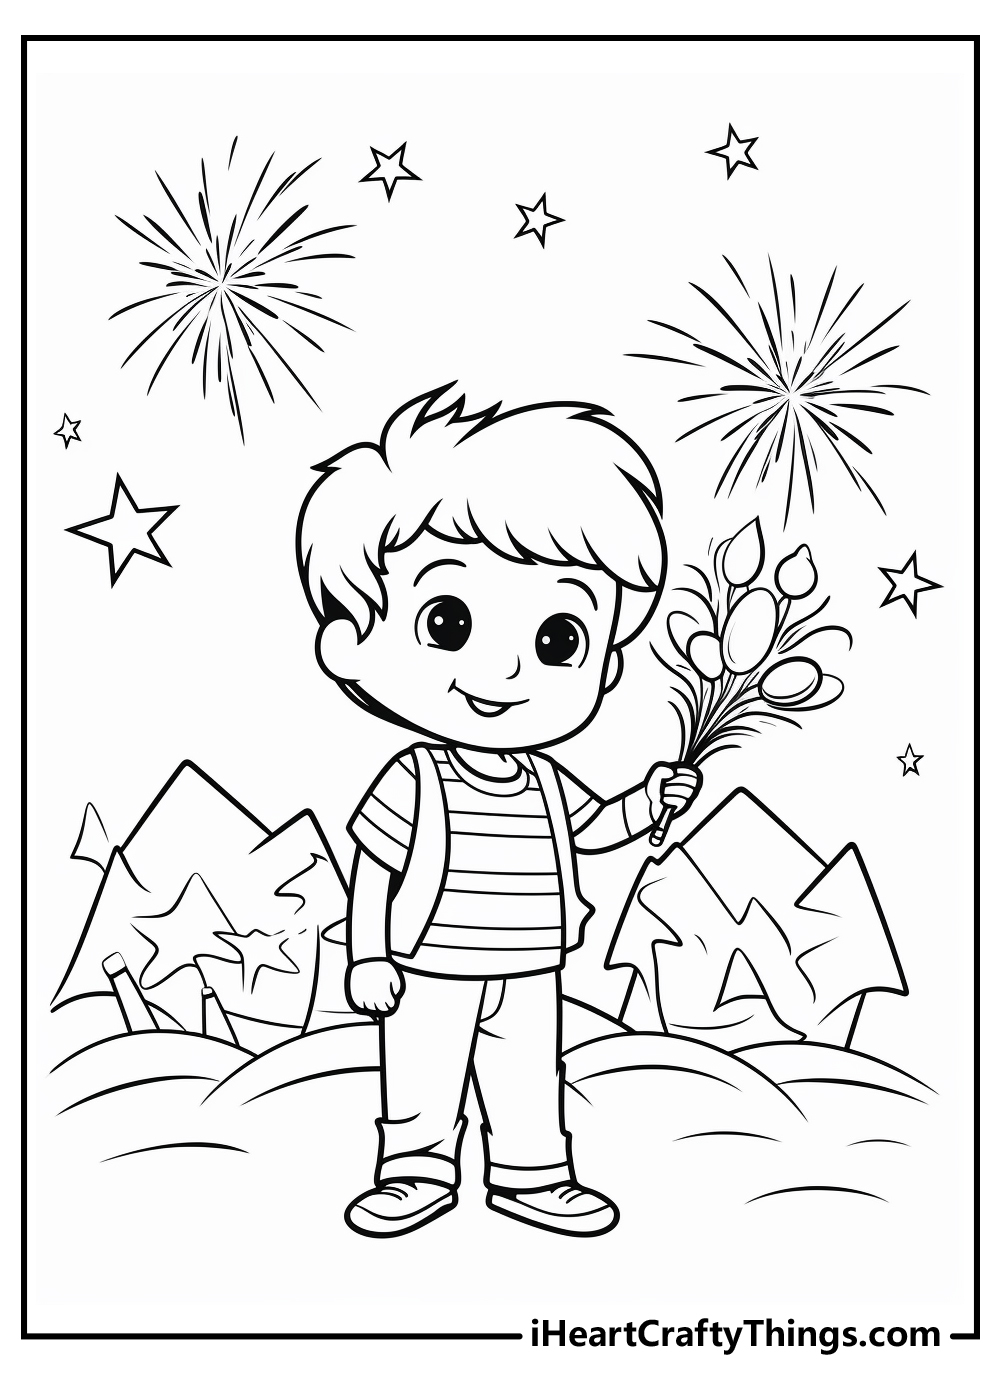 4th of july coloring sheet download